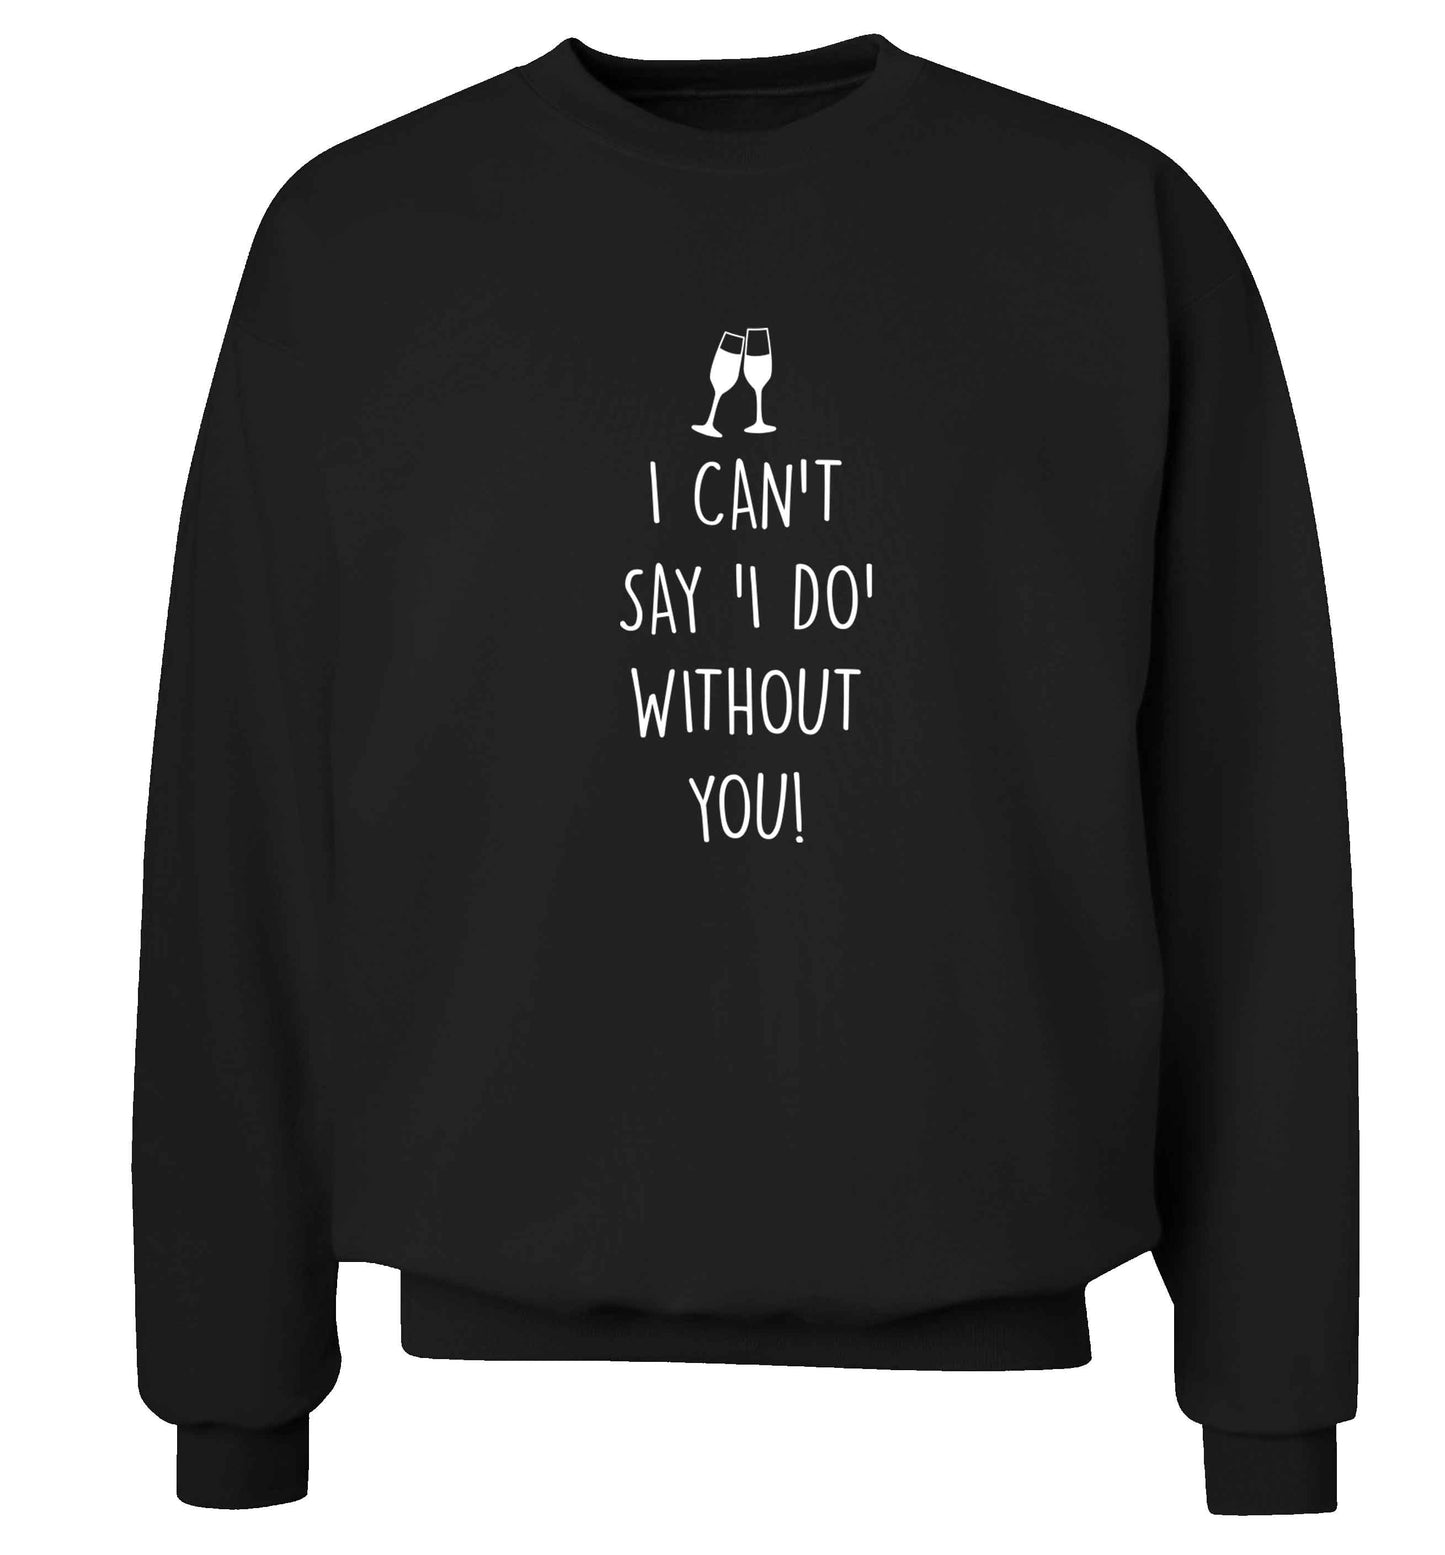 I can't say 'I do' without you! adult's unisex black sweater 2XL